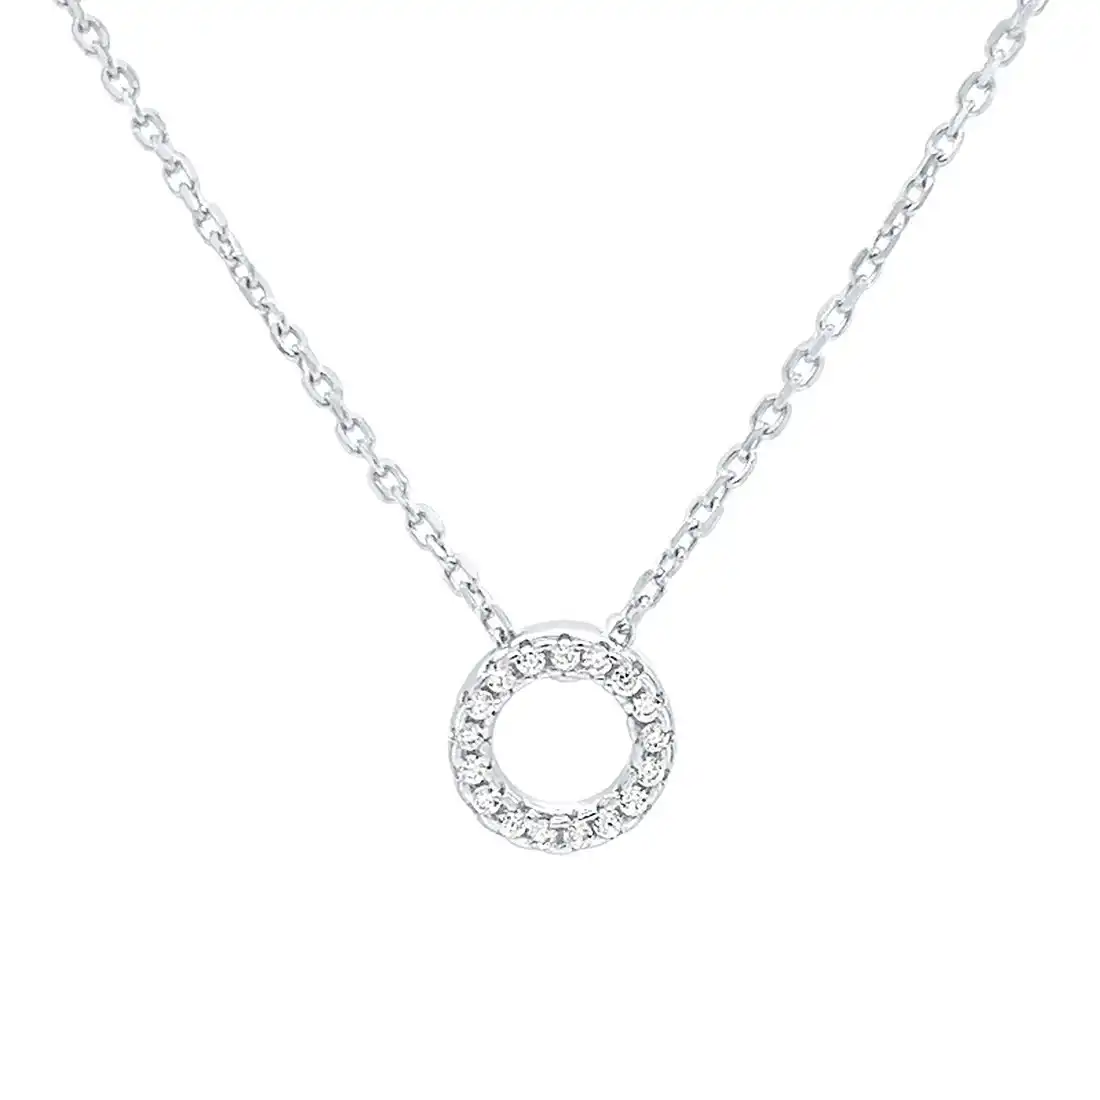 Children's Open Circle 42cm Necklace with Cubic Zirconia in Sterling Silver